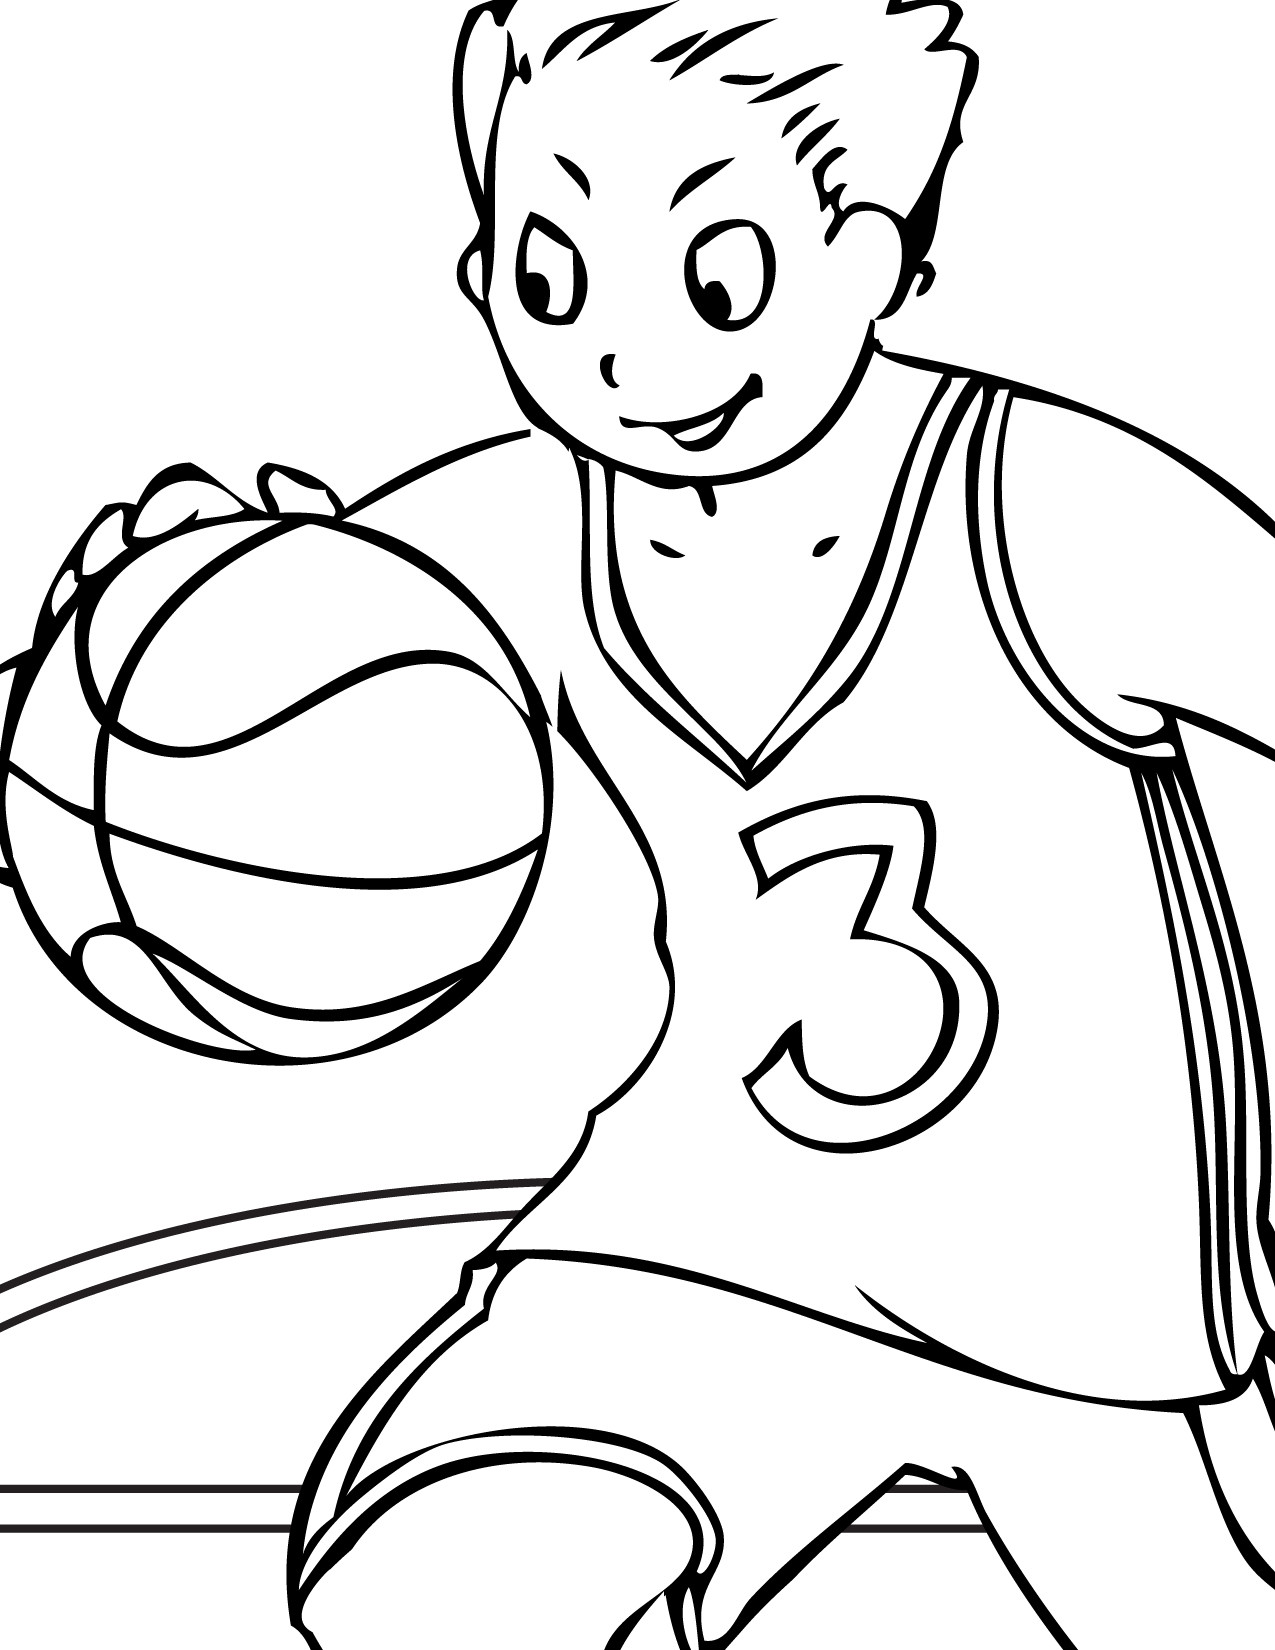 Kids On Line Coloring Pages
 Free Printable Volleyball Coloring Pages For Kids